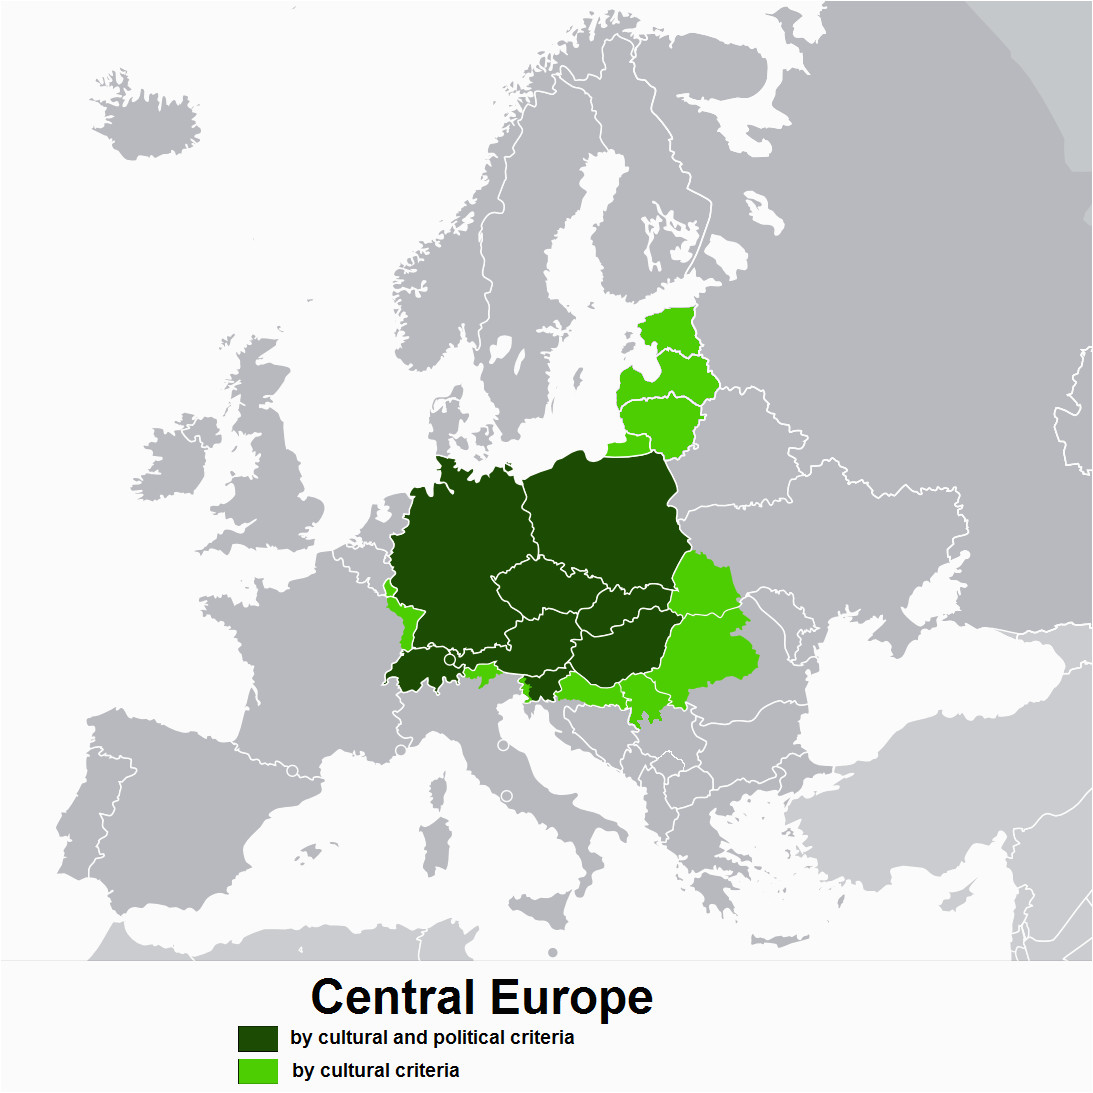 does central europe really exist or are there western and